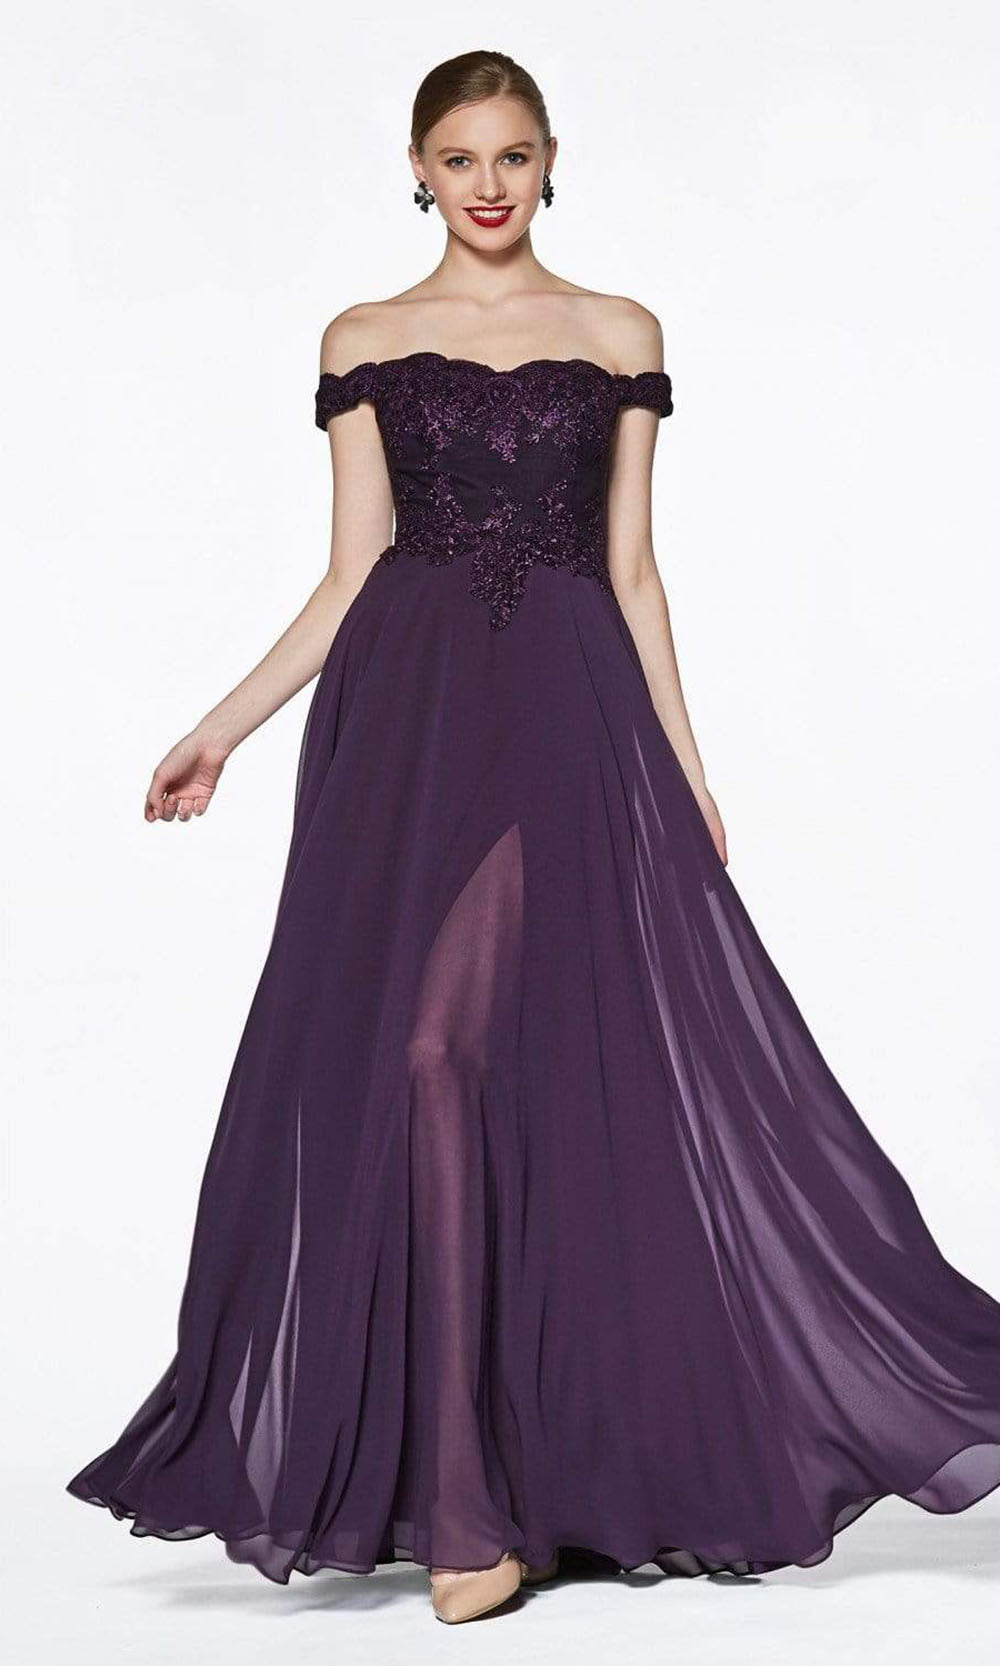 Cinderella Divine - Flowy Chiffon Lace Embellished A-Line Gown 7258 - 1 pc Eggplant In Size 3X Available CCSALE 3X / Eggplant